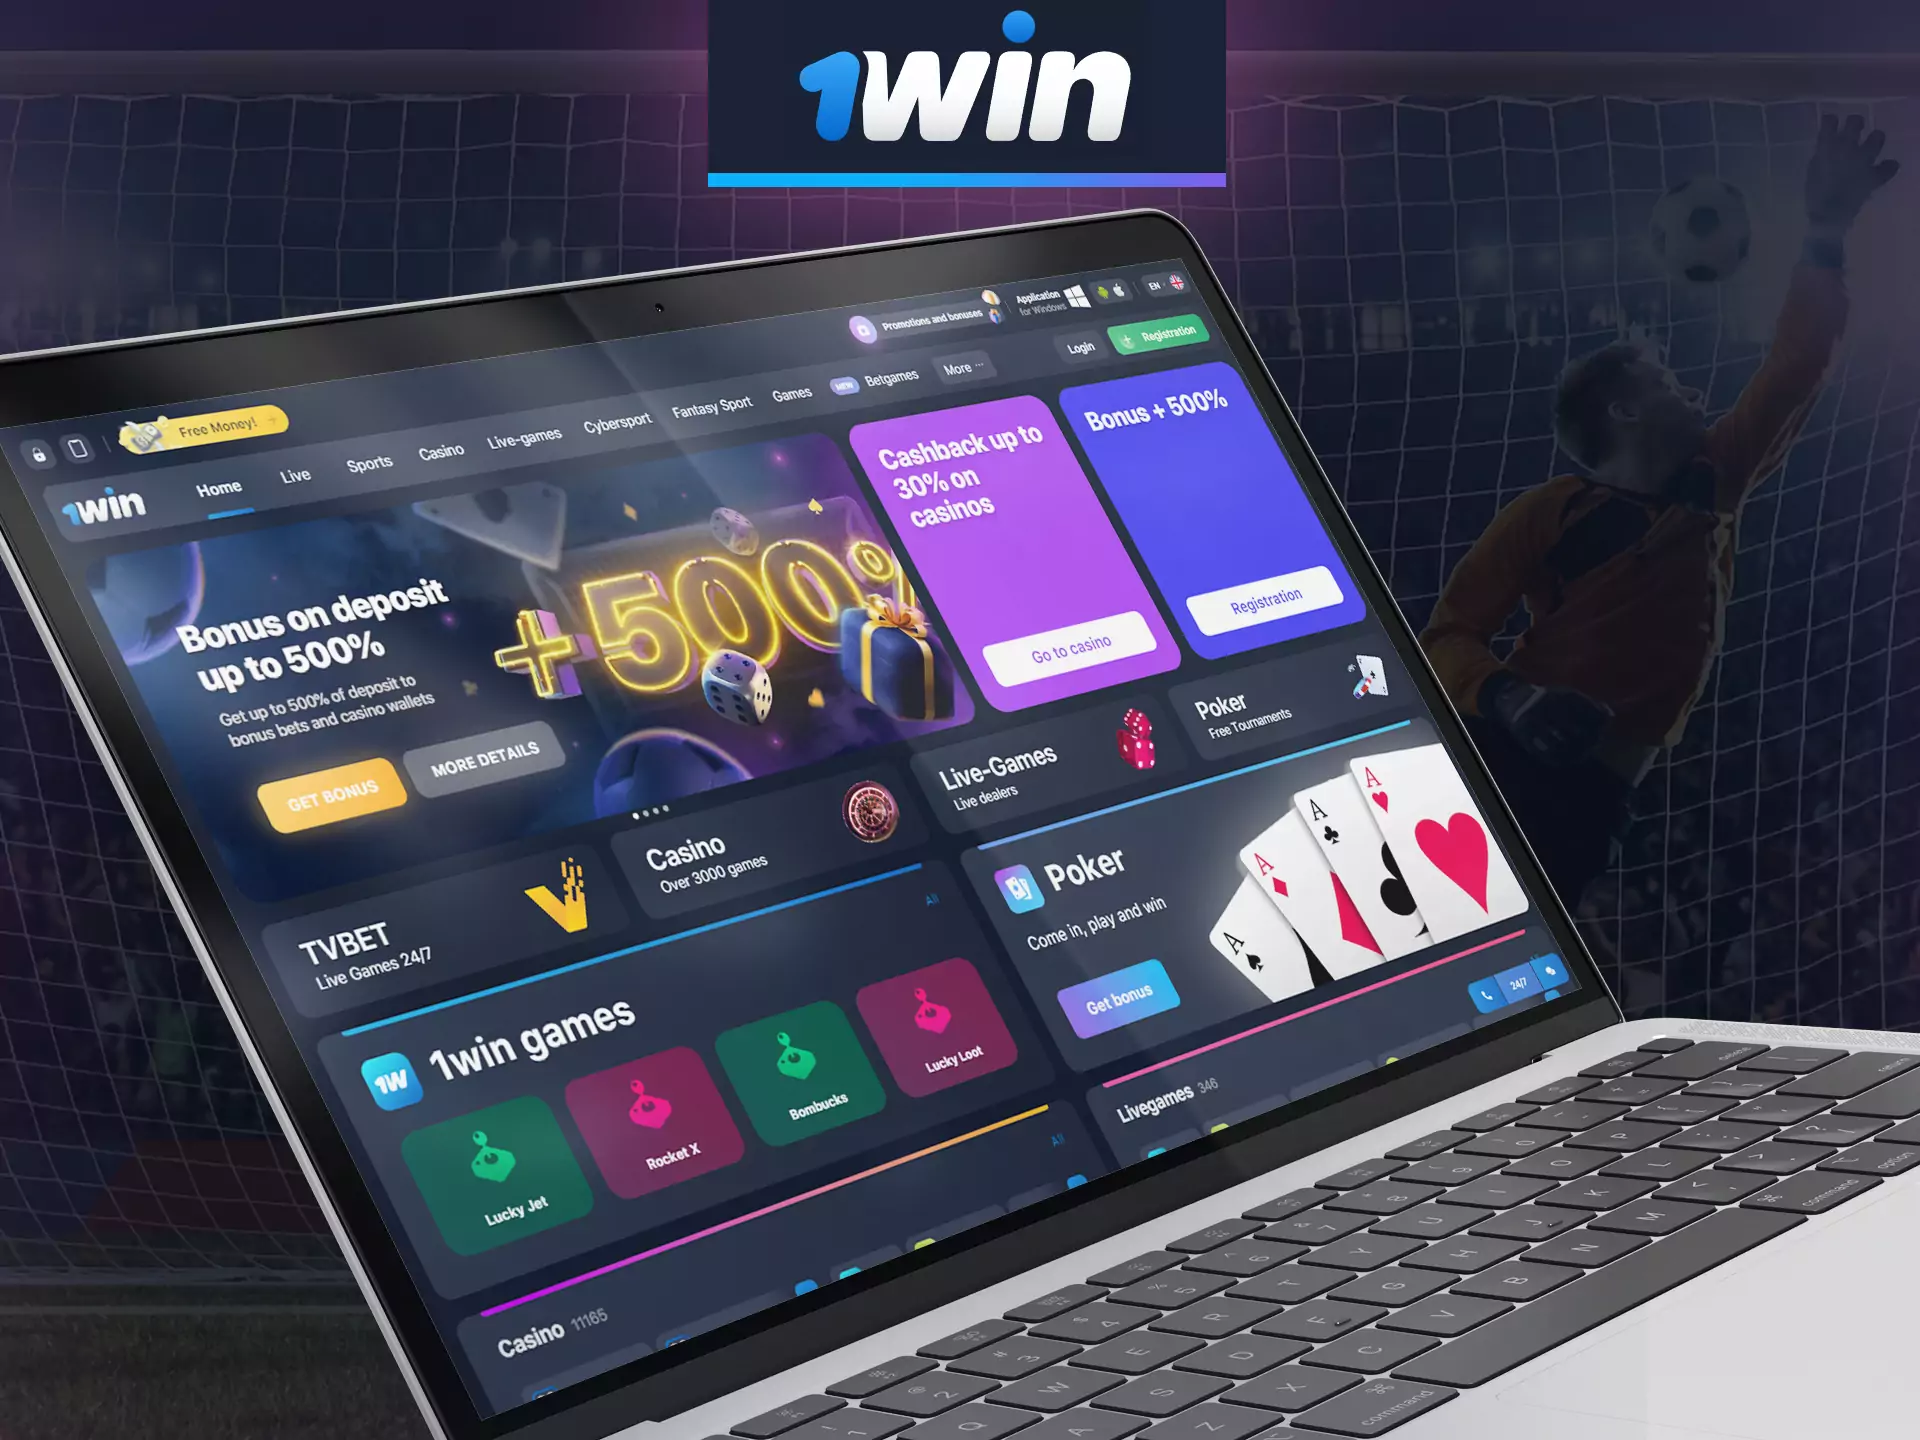 Visit 1win website and start betting.